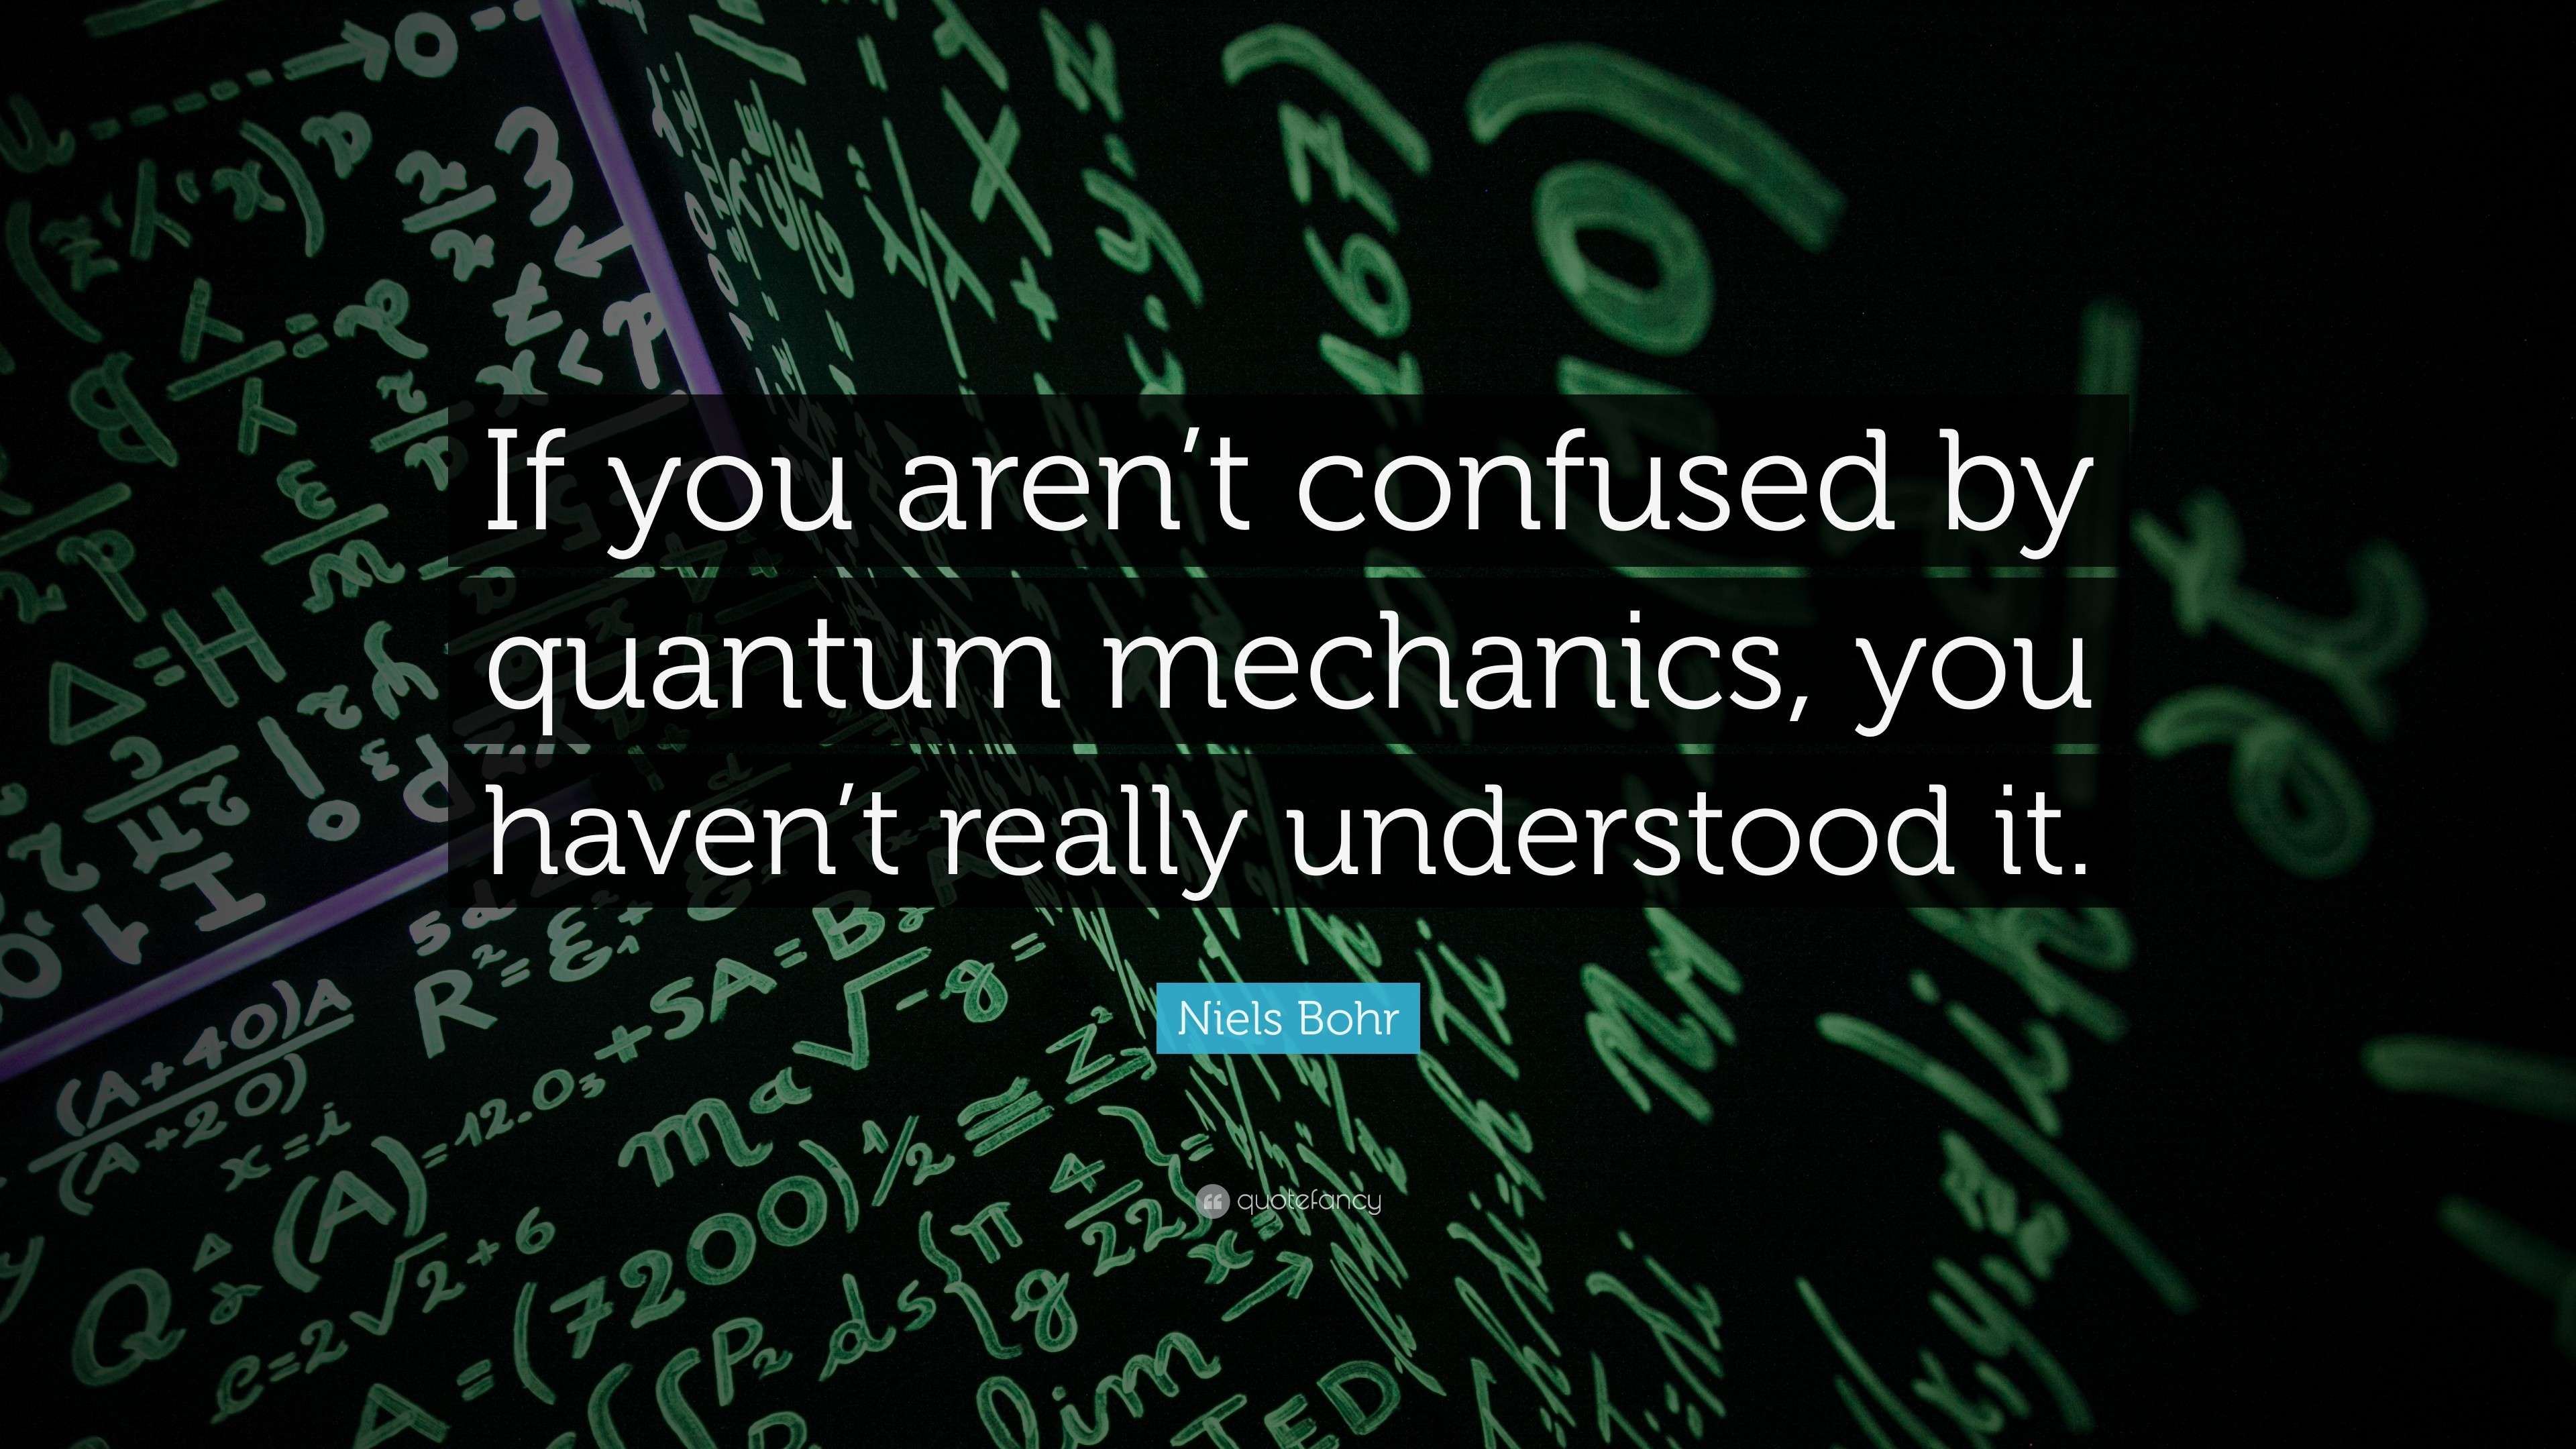 3840x2160 Niels Bohr Quote: “If you aren't confused by quantum mechanics, you